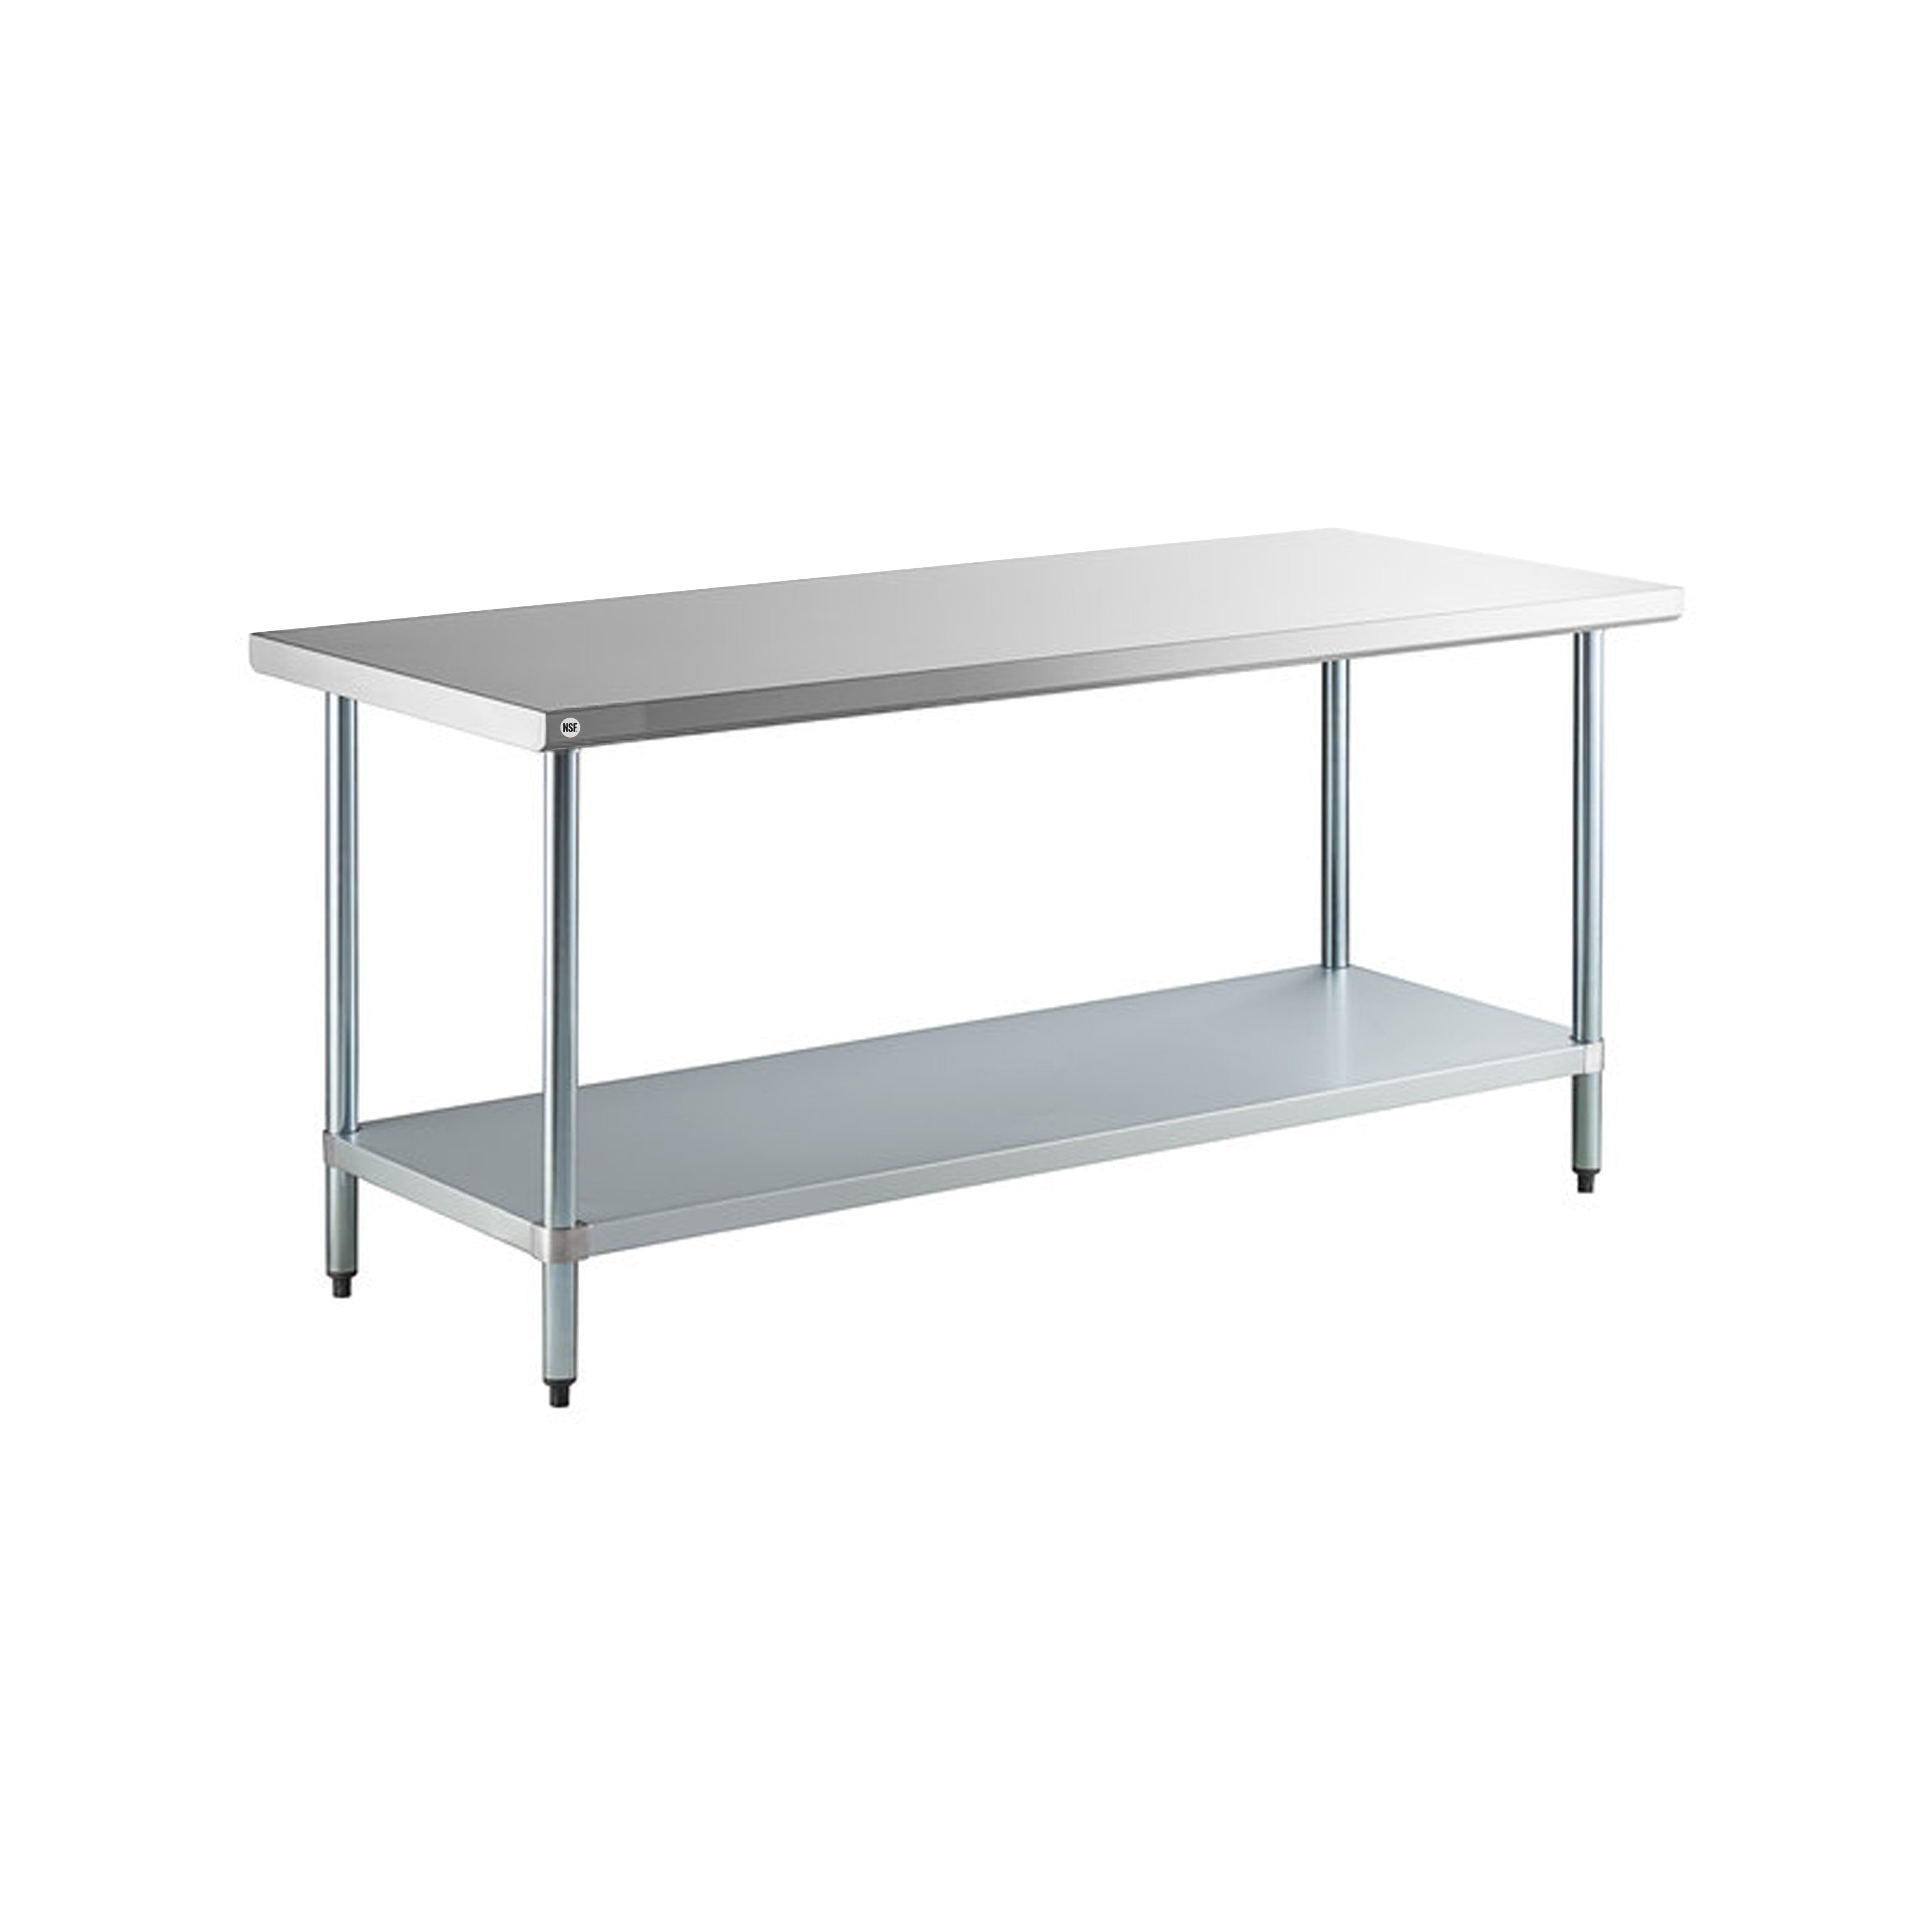 Omcan - 22073, Commercial 30" x 48" Stainless Steel Kitchen Work Table 1100lbs Light Duty